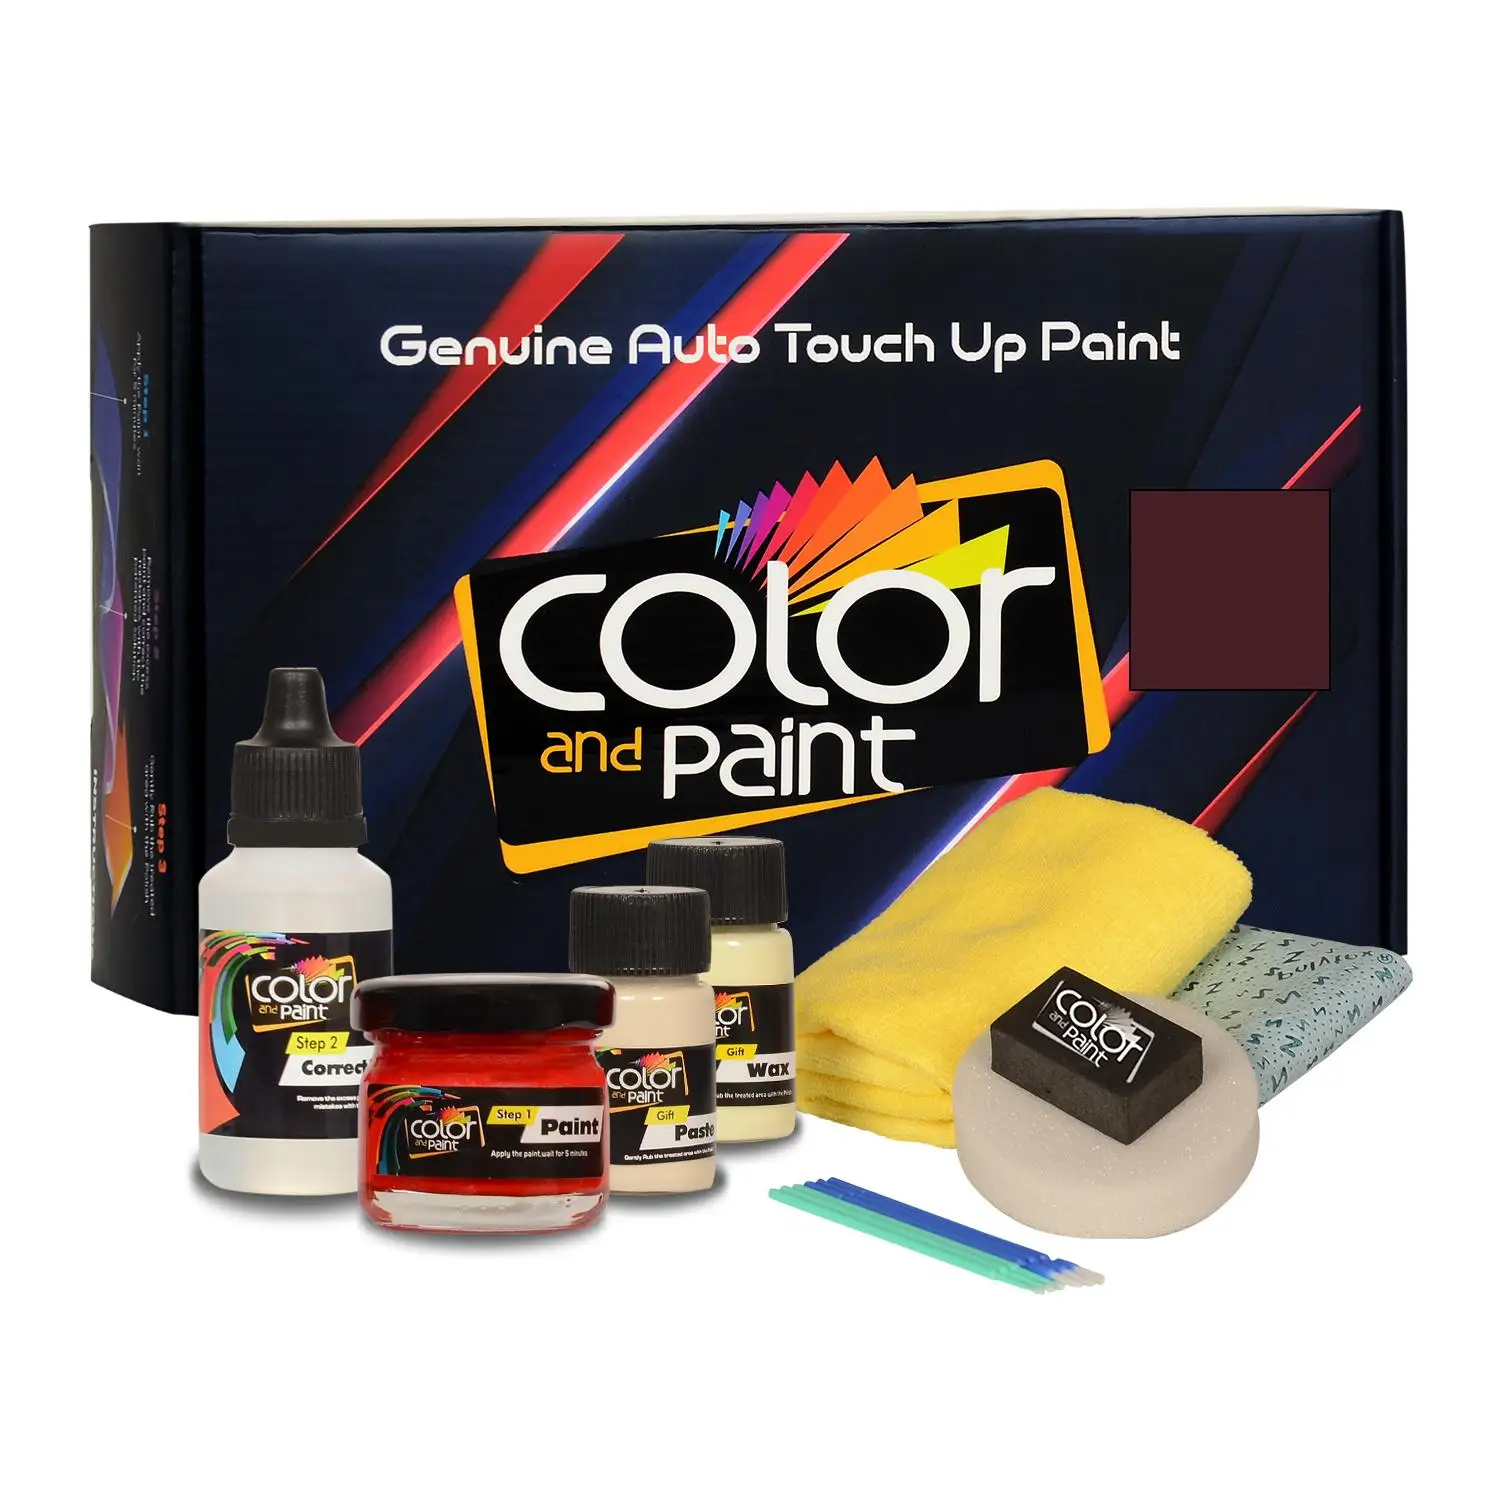 

Color and Paint compatible with Audi Automotive Touch Up Paint - CLASSICROT MET - LQ81 - Basic Care